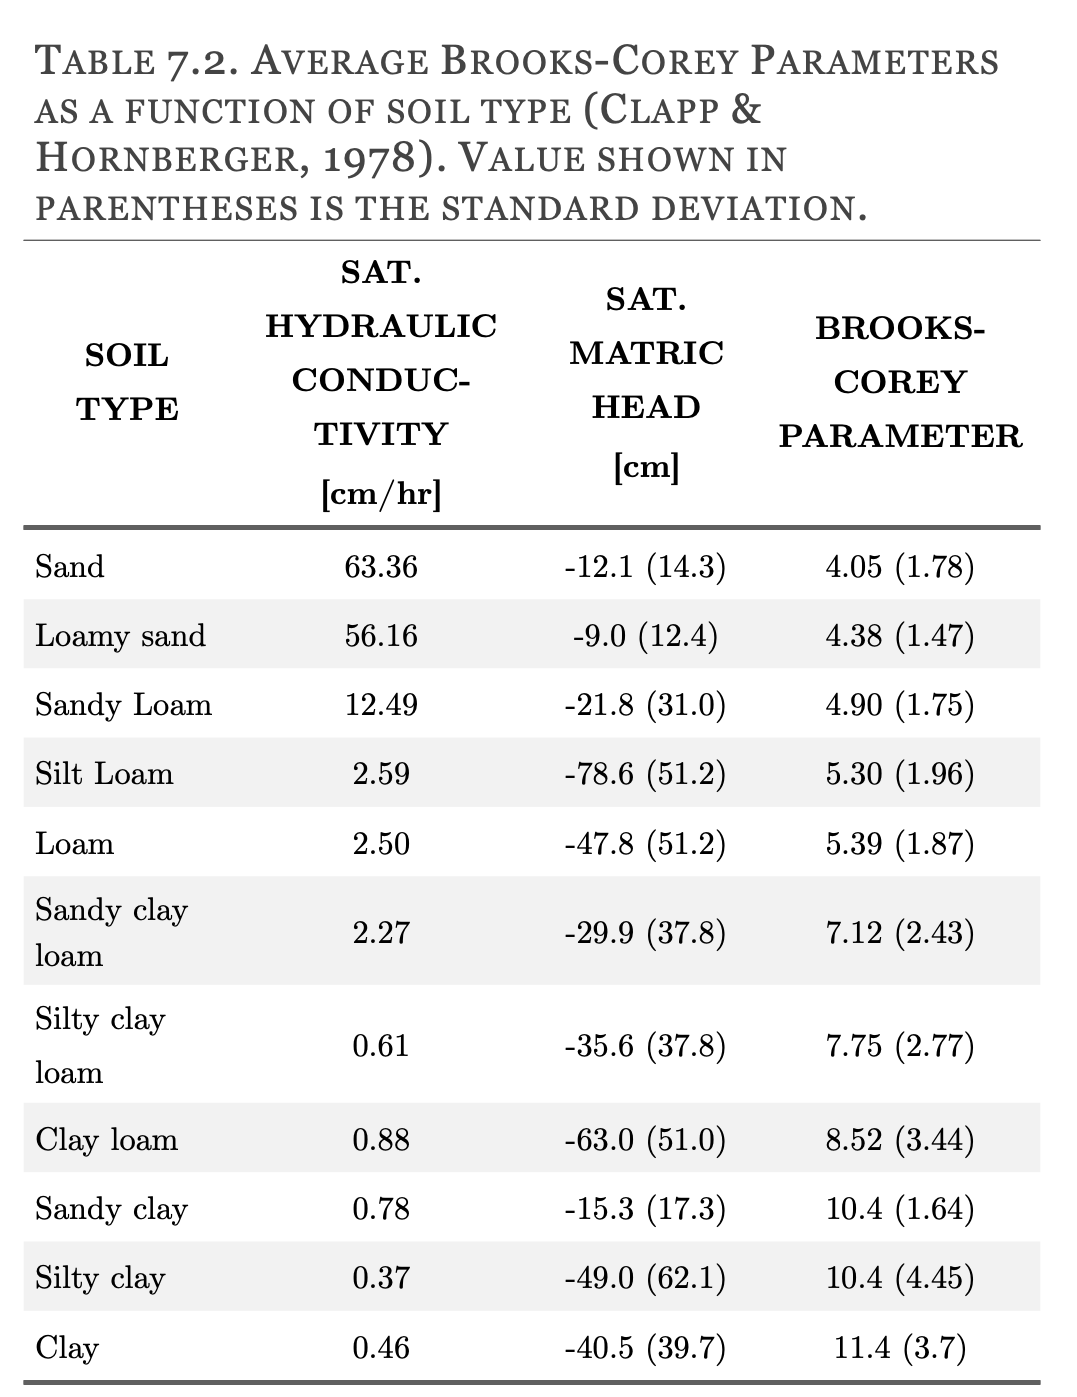 TABLE 7.2. AVERAGE BROOKS-COREY PARAMETERS
AS A FUNCTION OF SOIL TYPE (CLAPP &
HORNBERGER,
1978). VALUE SHOWN IN
PARENTHESES IS THE STANDARD DEVIATION.
SOIL
TYPE
Sand
Loamy sand
Sandy Loam
Silt Loam
Loam
Sandy clay
loam
Silty clay
loam
Clay loam
Sandy clay
Silty clay
Clay
SAT.
HYDRAULIC
CONDUC-
TIVITY
[cm/hr]
63.36
56.16
12.49
2.59
2.50
2.27
0.61
0.88
0.78
0.37
0.46
SAT.
MATRIC
HEAD
[cm]
-12.1 (14.3)
-9.0 (12.4)
-21.8 (31.0)
-78.6 (51.2)
-47.8 (51.2)
-29.9 (37.8)
-35.6 (37.8)
-63.0 (51.0)
-15.3 (17.3)
-49.0 (62.1)
-40.5 (39.7)
BROOKS-
COREY
PARAMETER
4.05 (1.78)
4.38 (1.47)
4.90 (1.75)
5.30 (1.96)
5.39 (1.87)
7.12 (2.43)
7.75 (2.77)
8.52 (3.44)
10.4 (1.64)
10.4 (4.45)
11.4 (3.7)